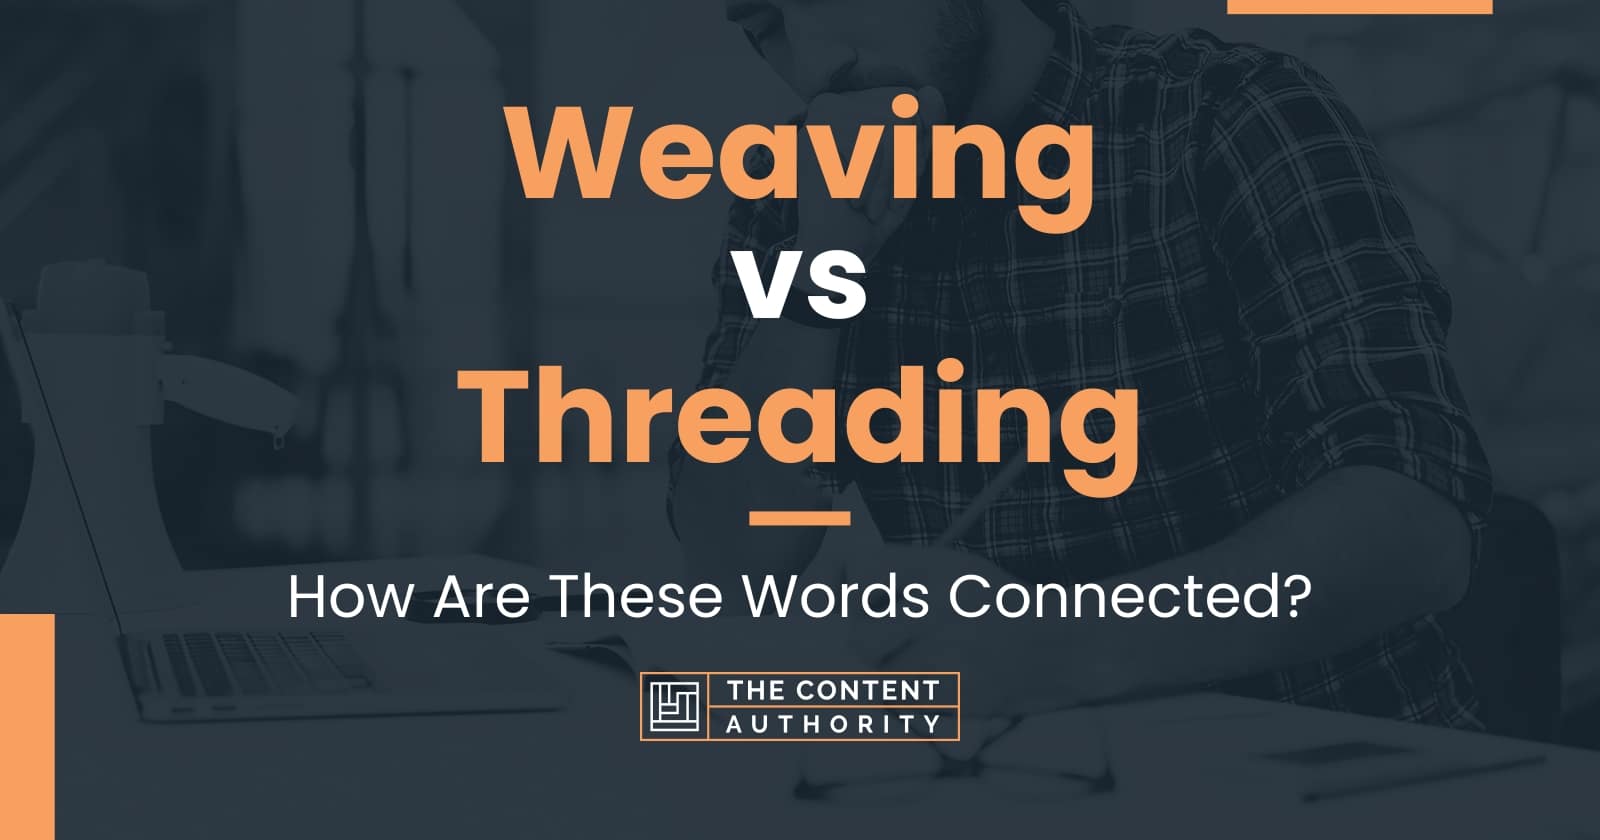 Weaving vs Threading: How Are These Words Connected?